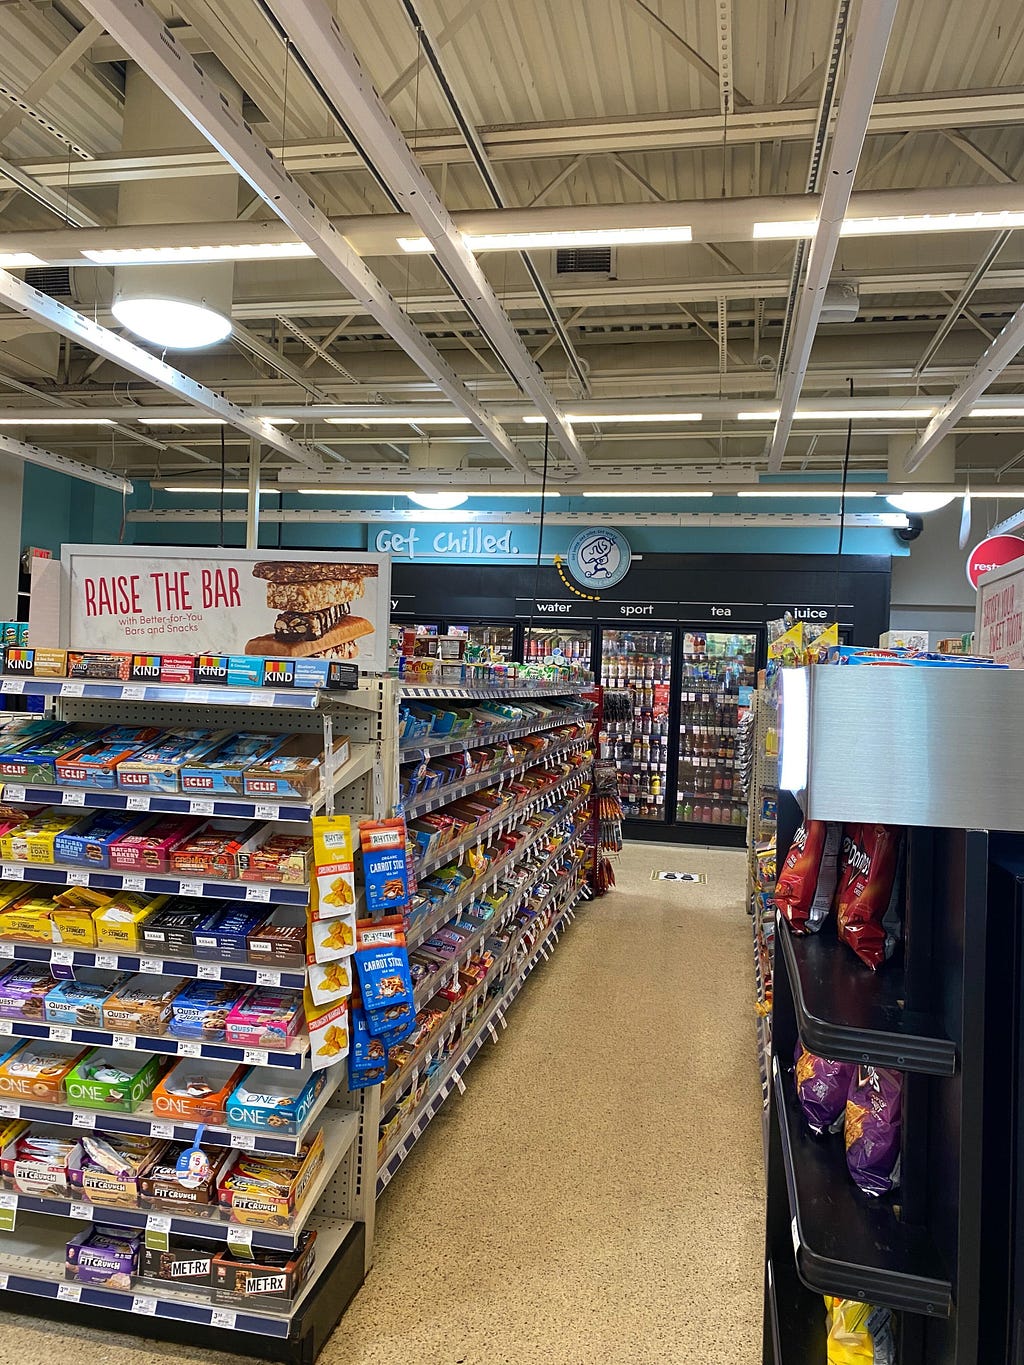 High-quality sensor hardware on the ceiling tracks every item in the convenience store as you shop.